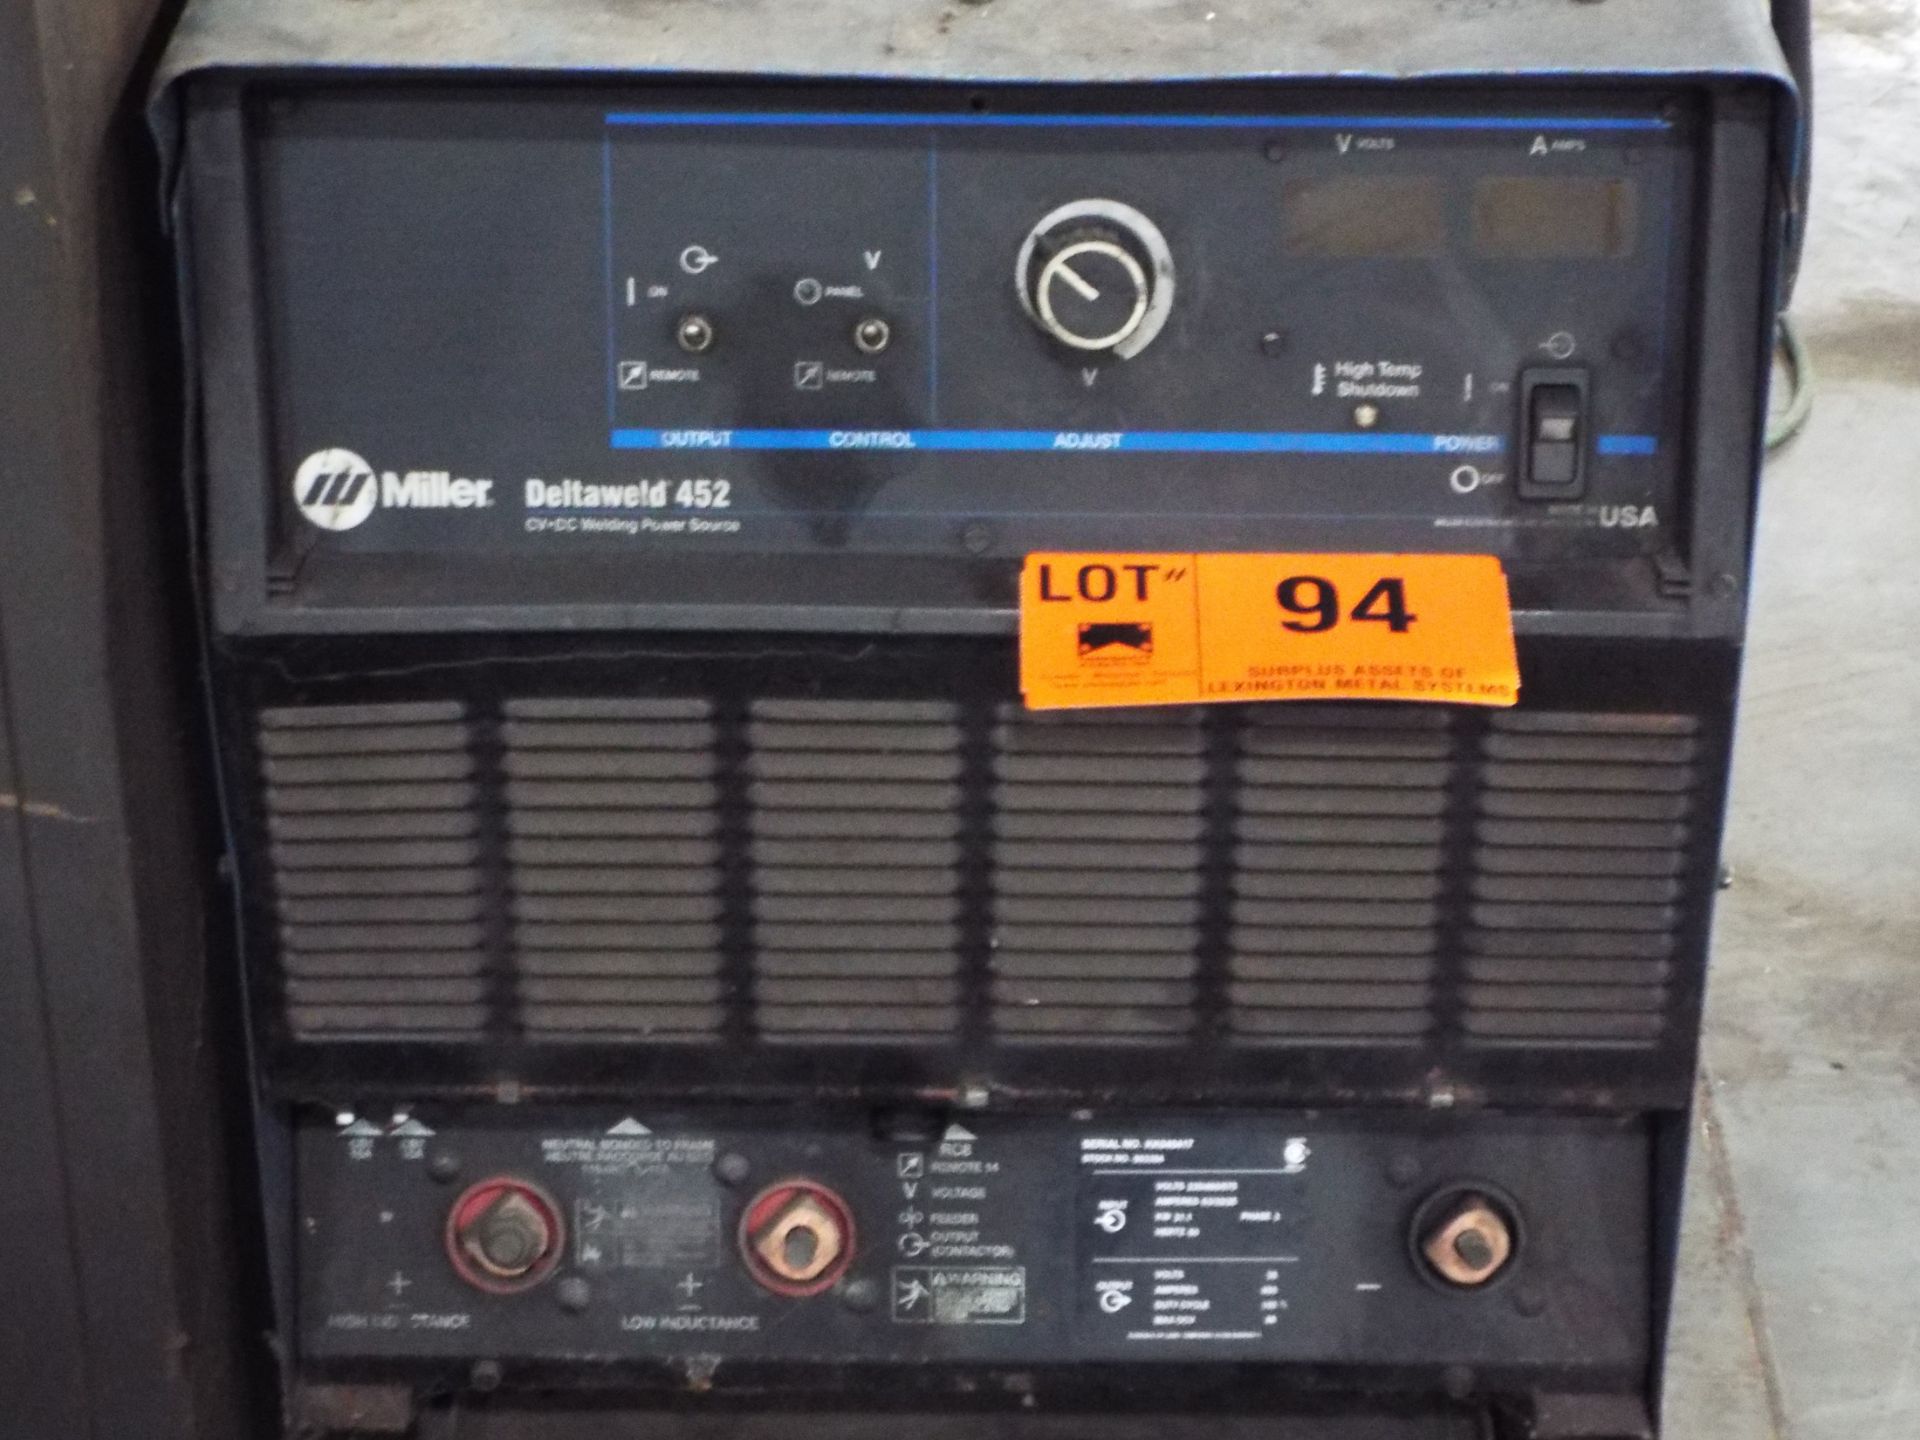 MILLER DELTAWELD 452 DIGITAL WELDING POWER SOURCE WITH LINCOLN ELECTRIC WIRE FEEDER S/N: KK040417 ( - Image 2 of 3